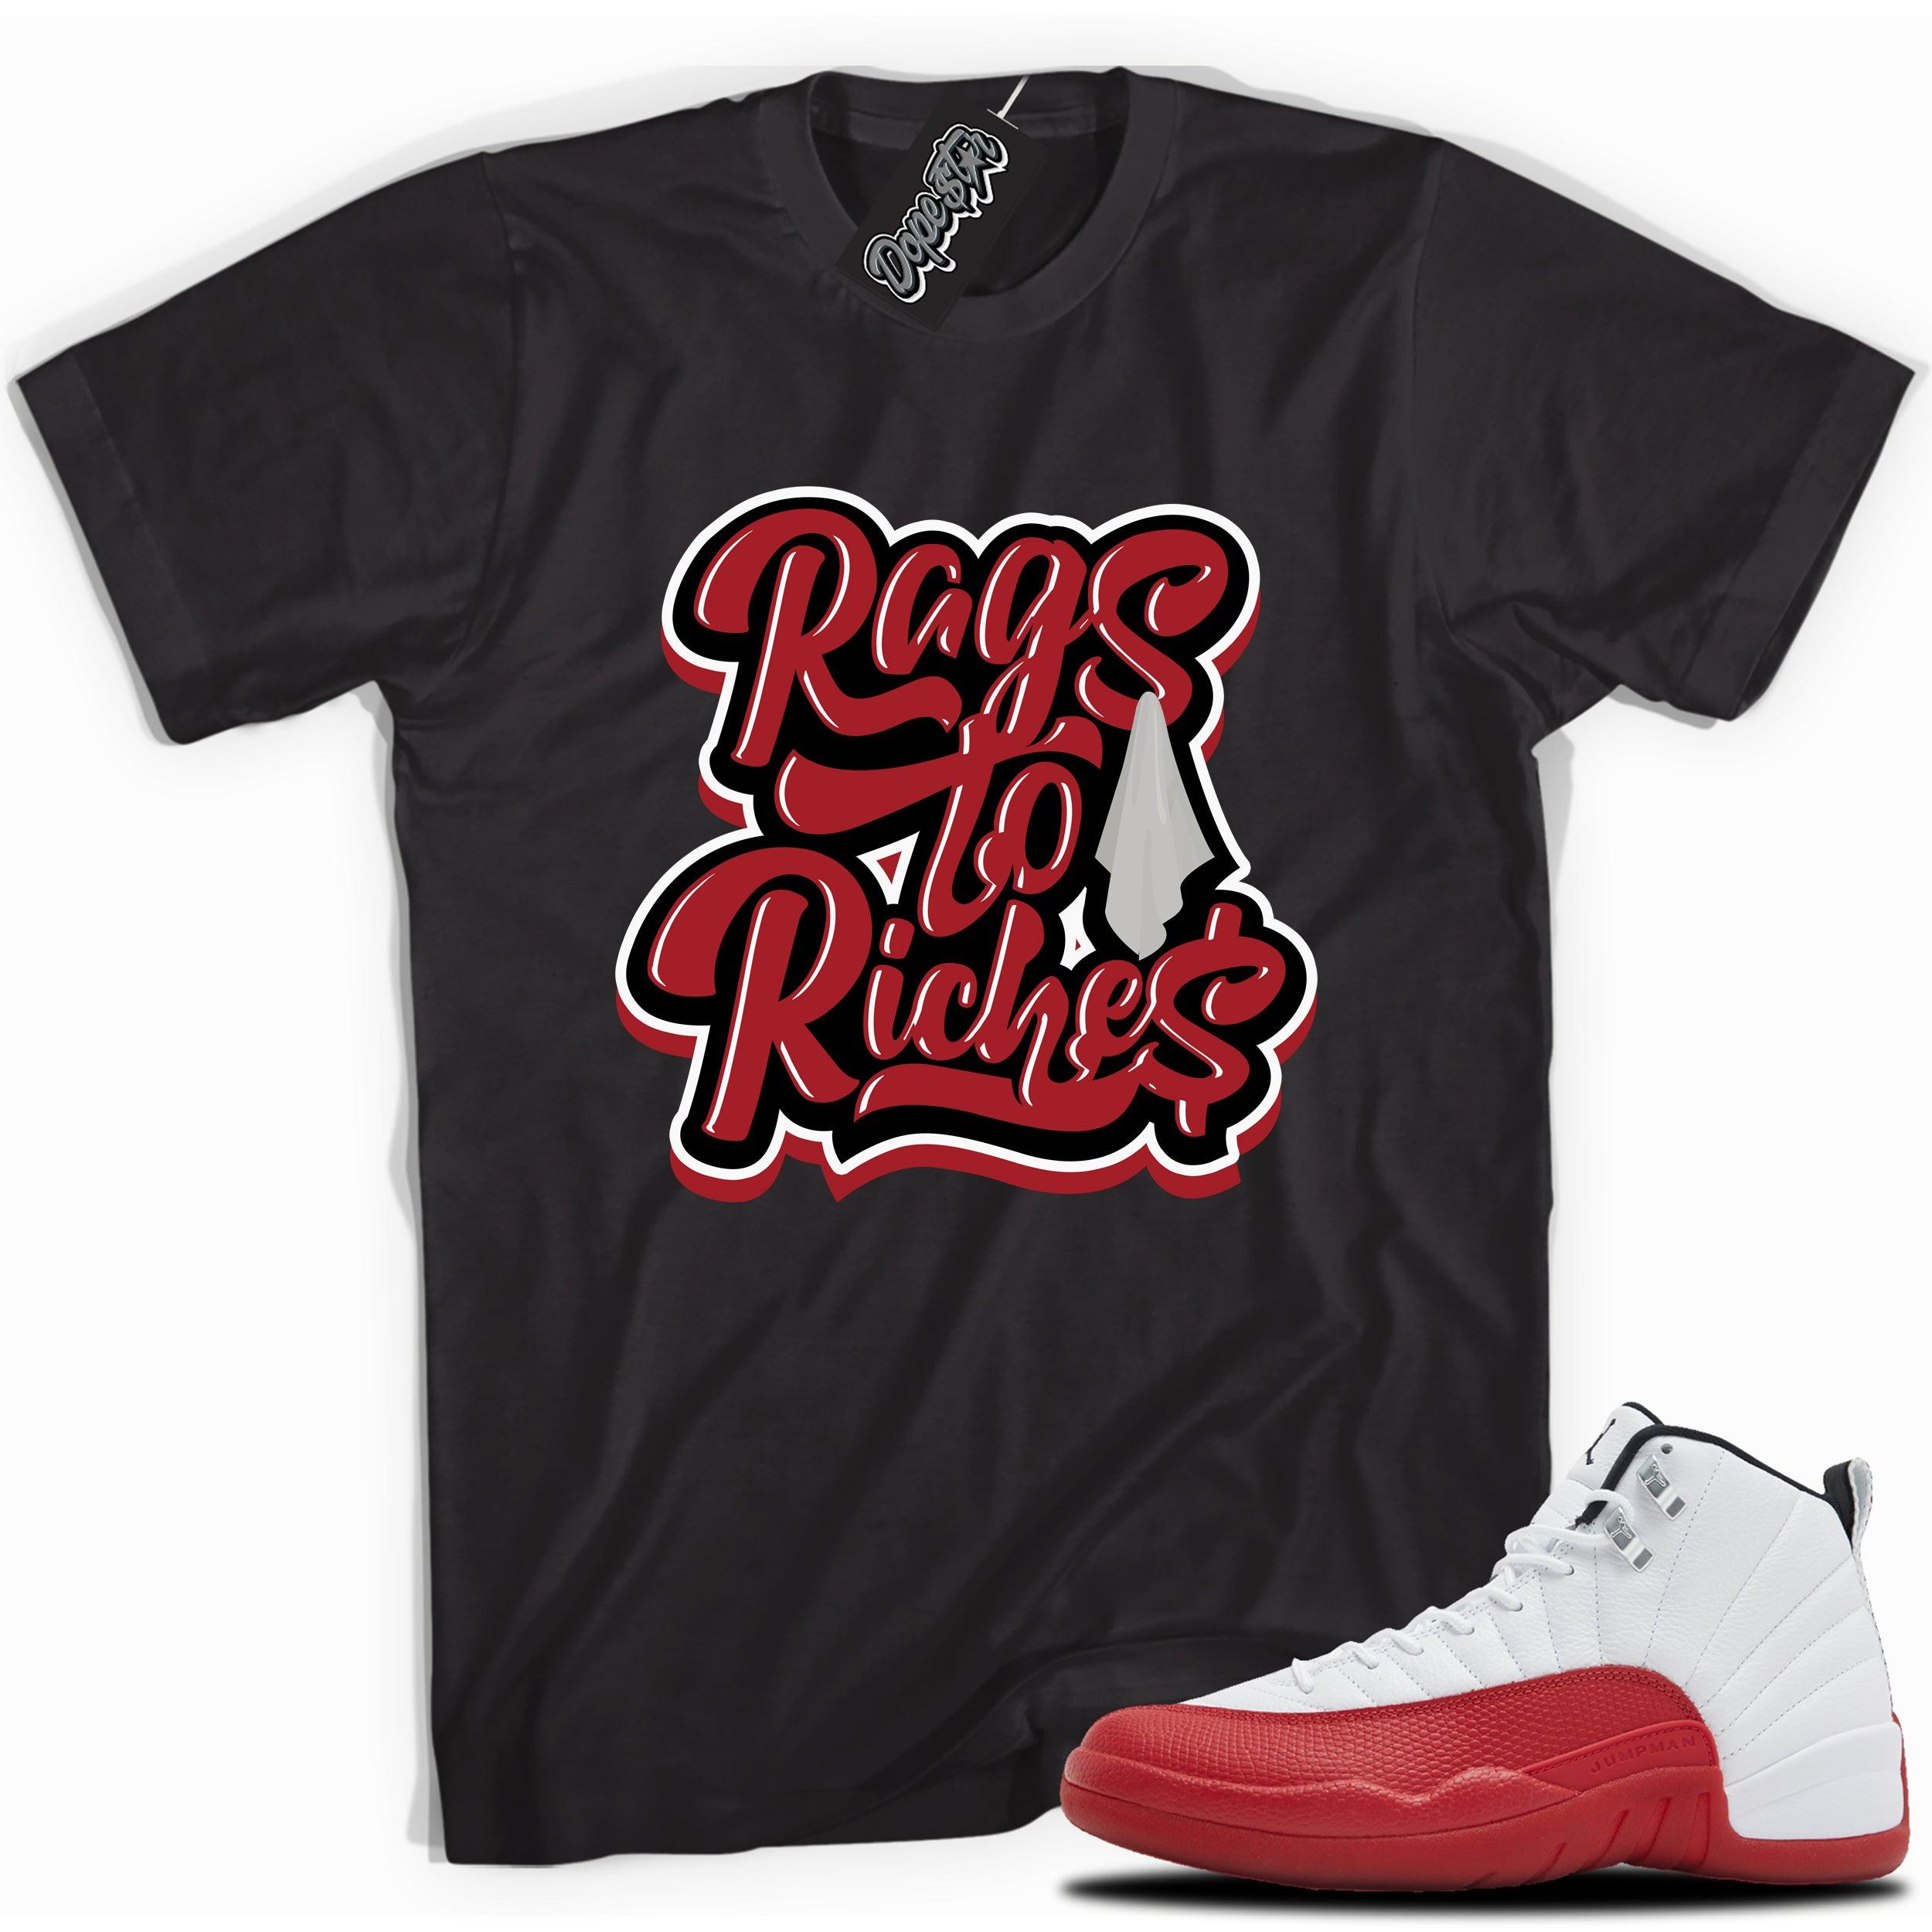 Cool Black graphic tee with “Rags To Riches” print, that perfectly matches Air Jordan 12 Retro Cherry Red 2023 red and white sneakers